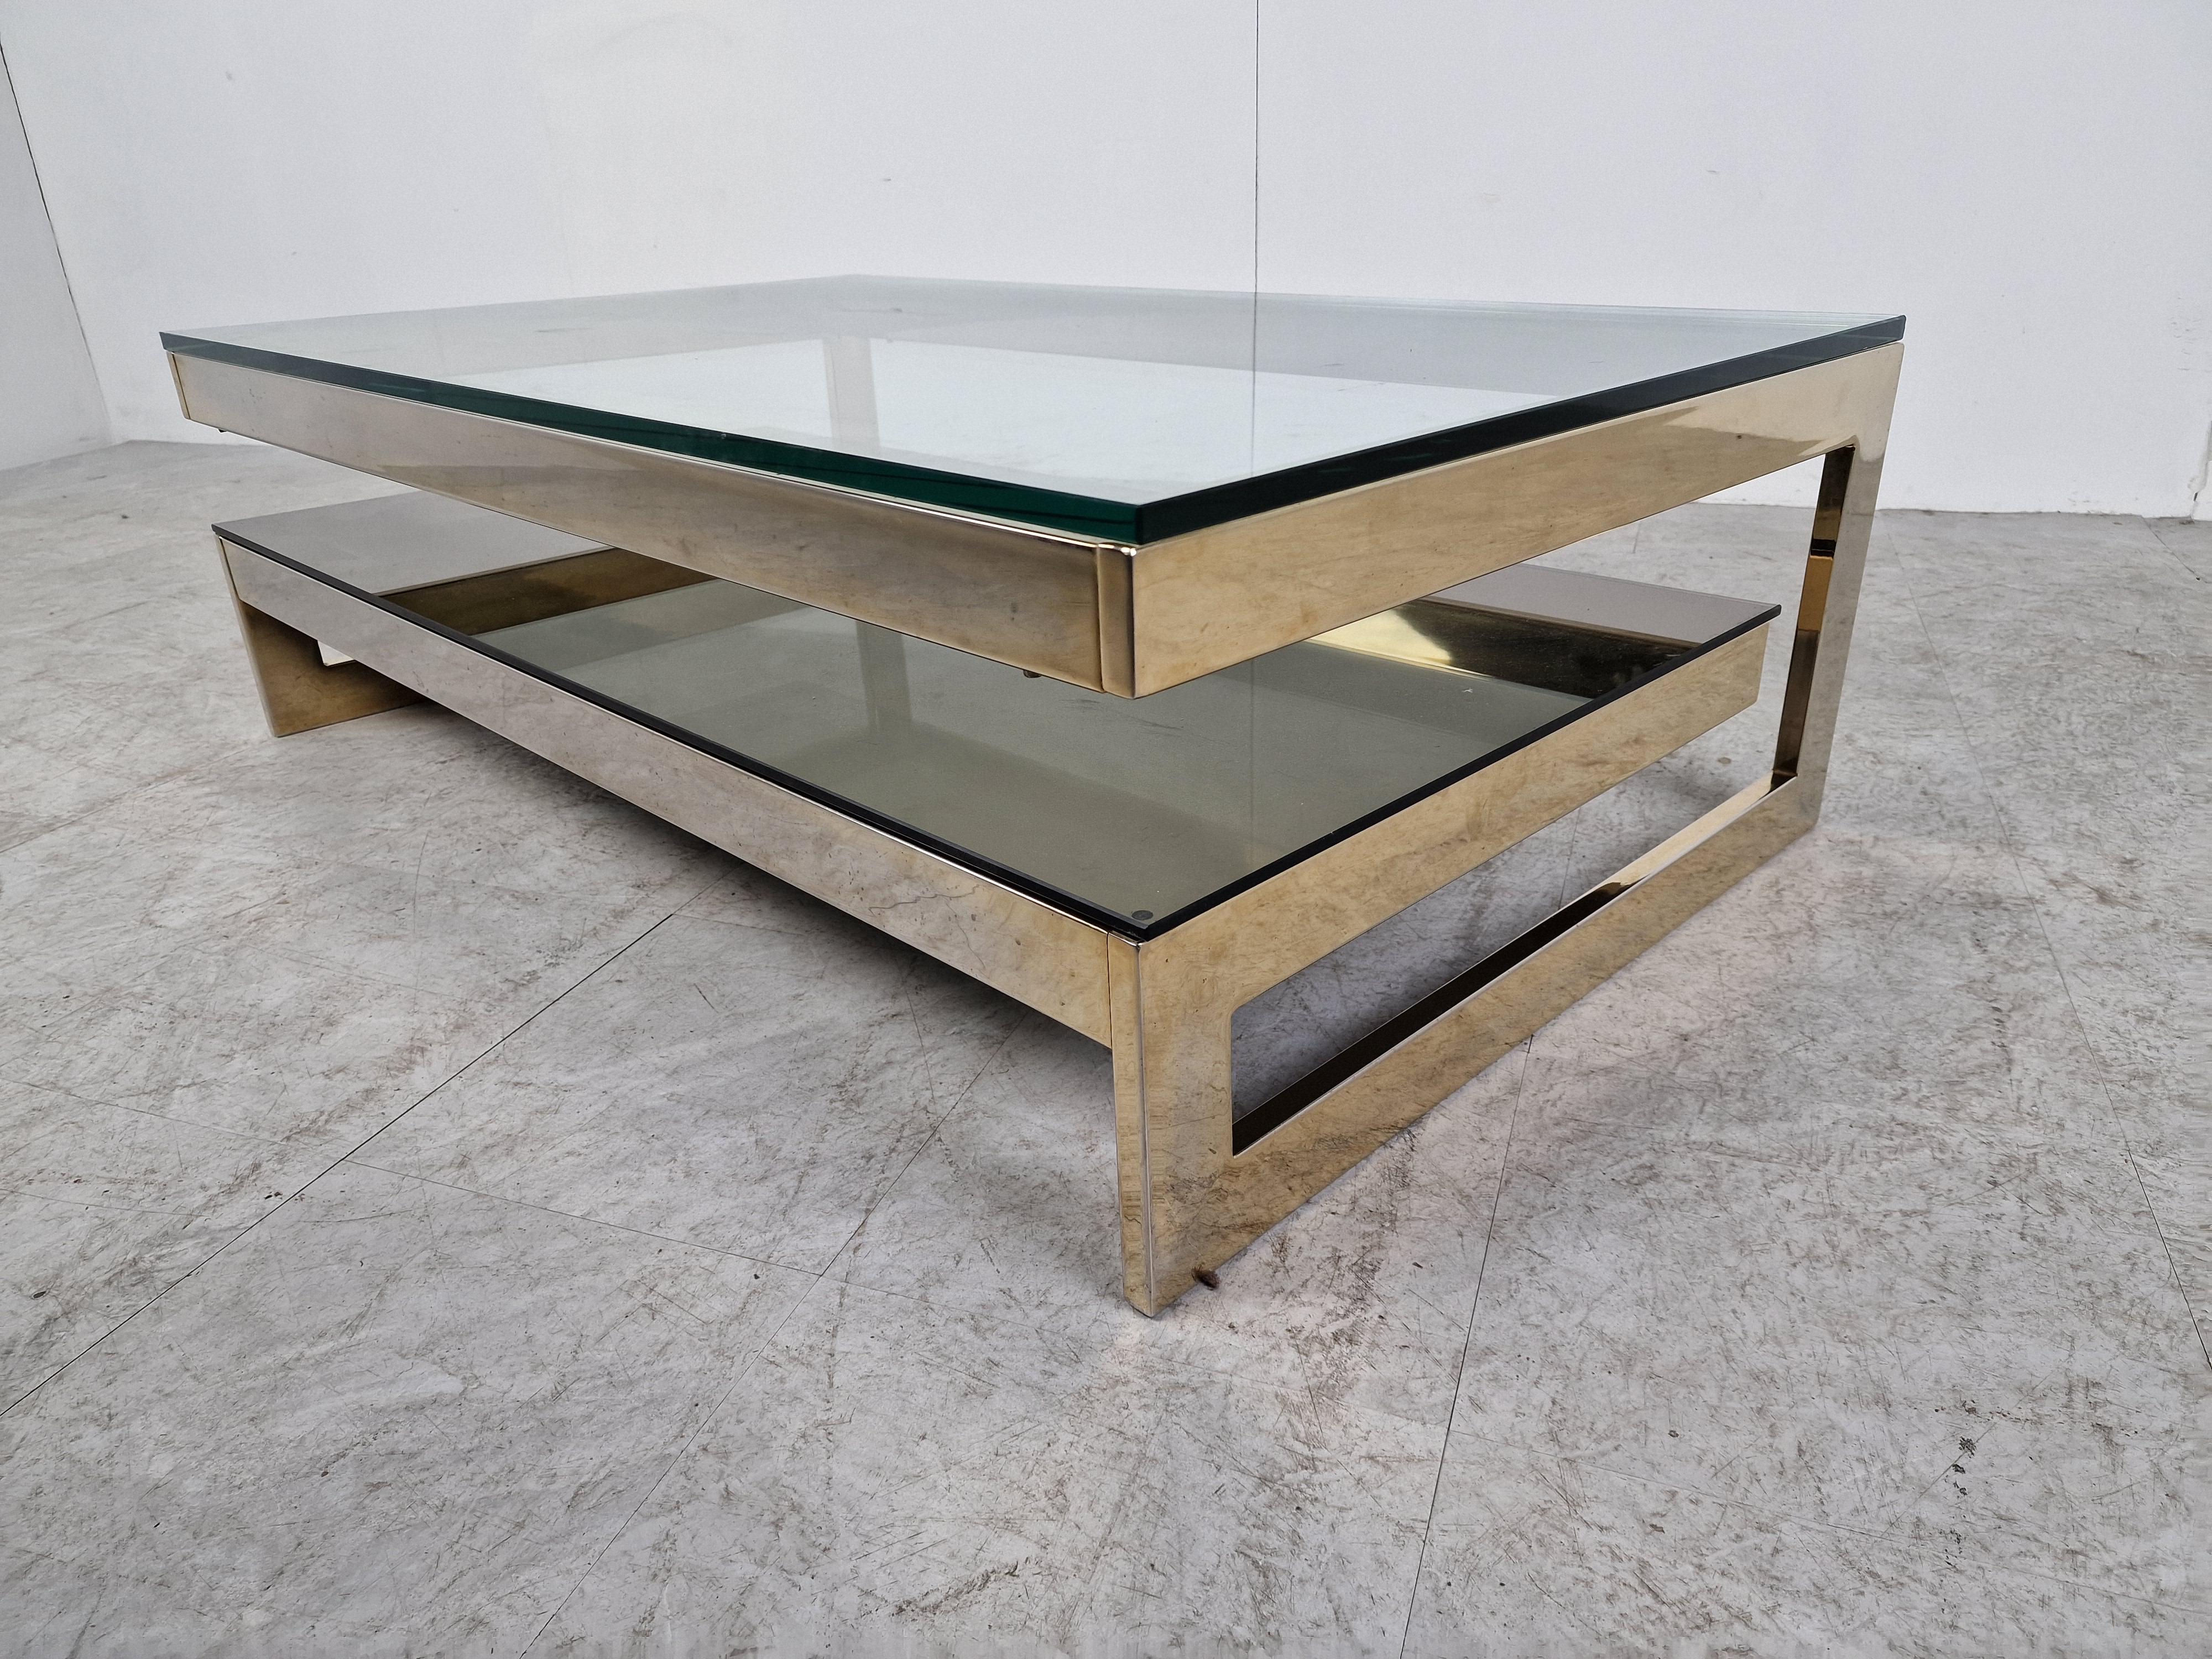 Quality 23kt gold layered and thick clear glass two tier coffee table manufactured by Belgochrom.

This table is a popular model and is referred to as the 'G' model

Belgochrom produced quality furniture pieces with a luxurious appeal.

Good